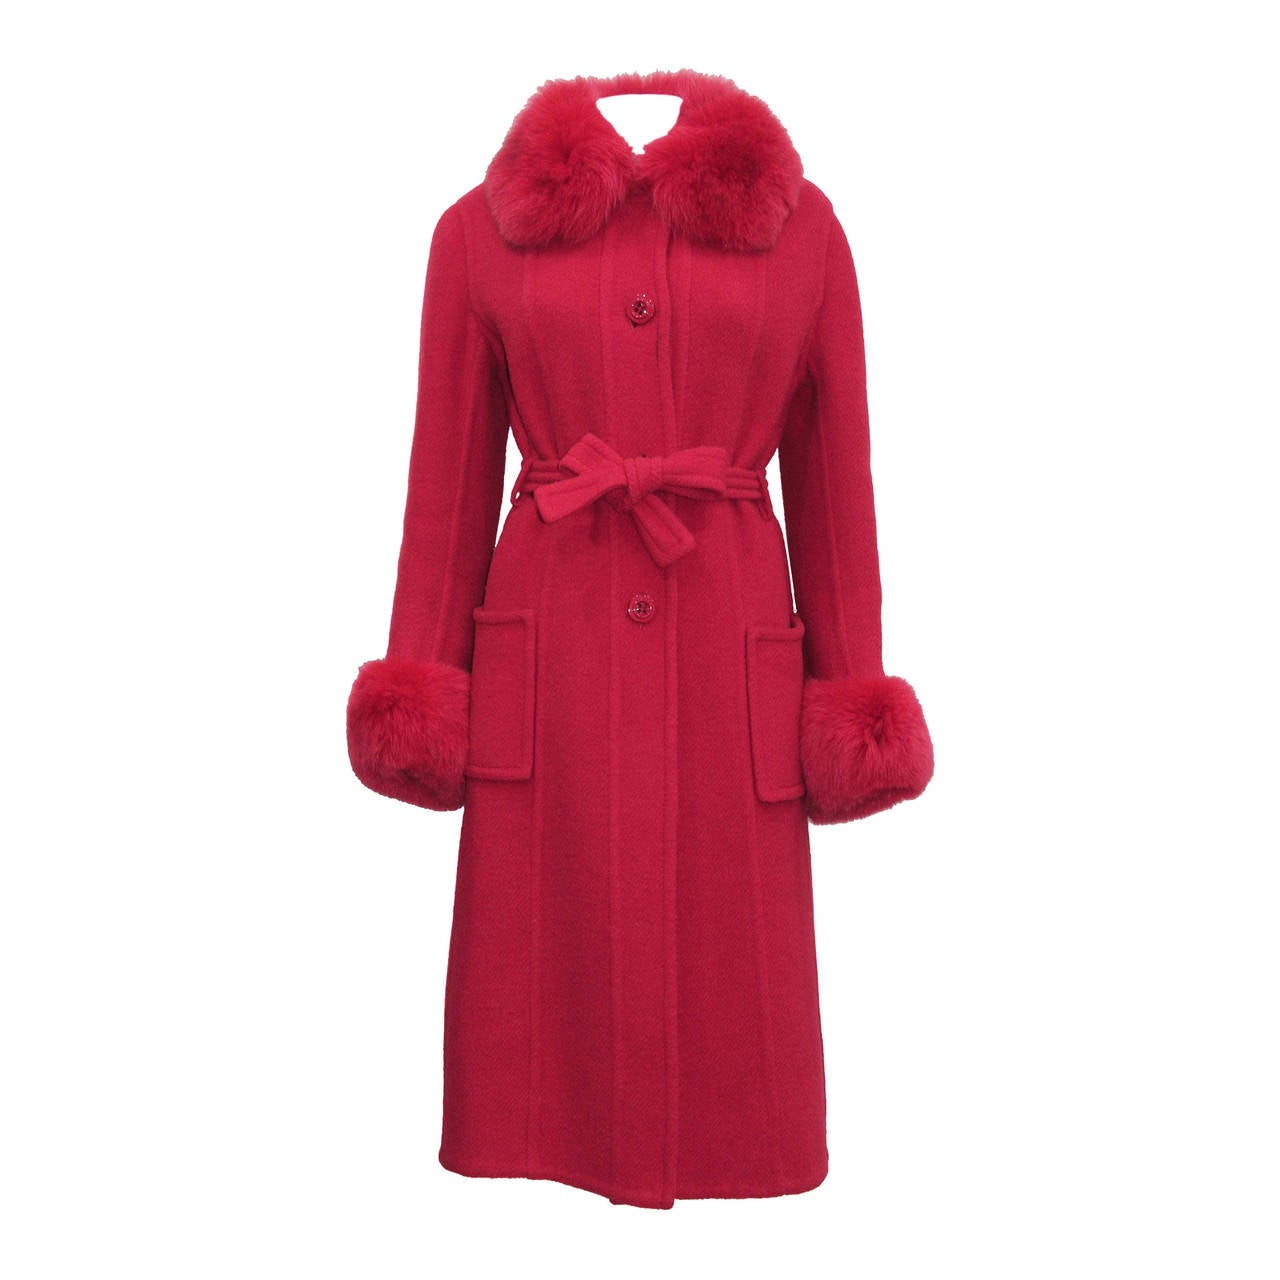 Exceptional 1960s red fox fur and tweed fall coat from THE WHITE HOUSE